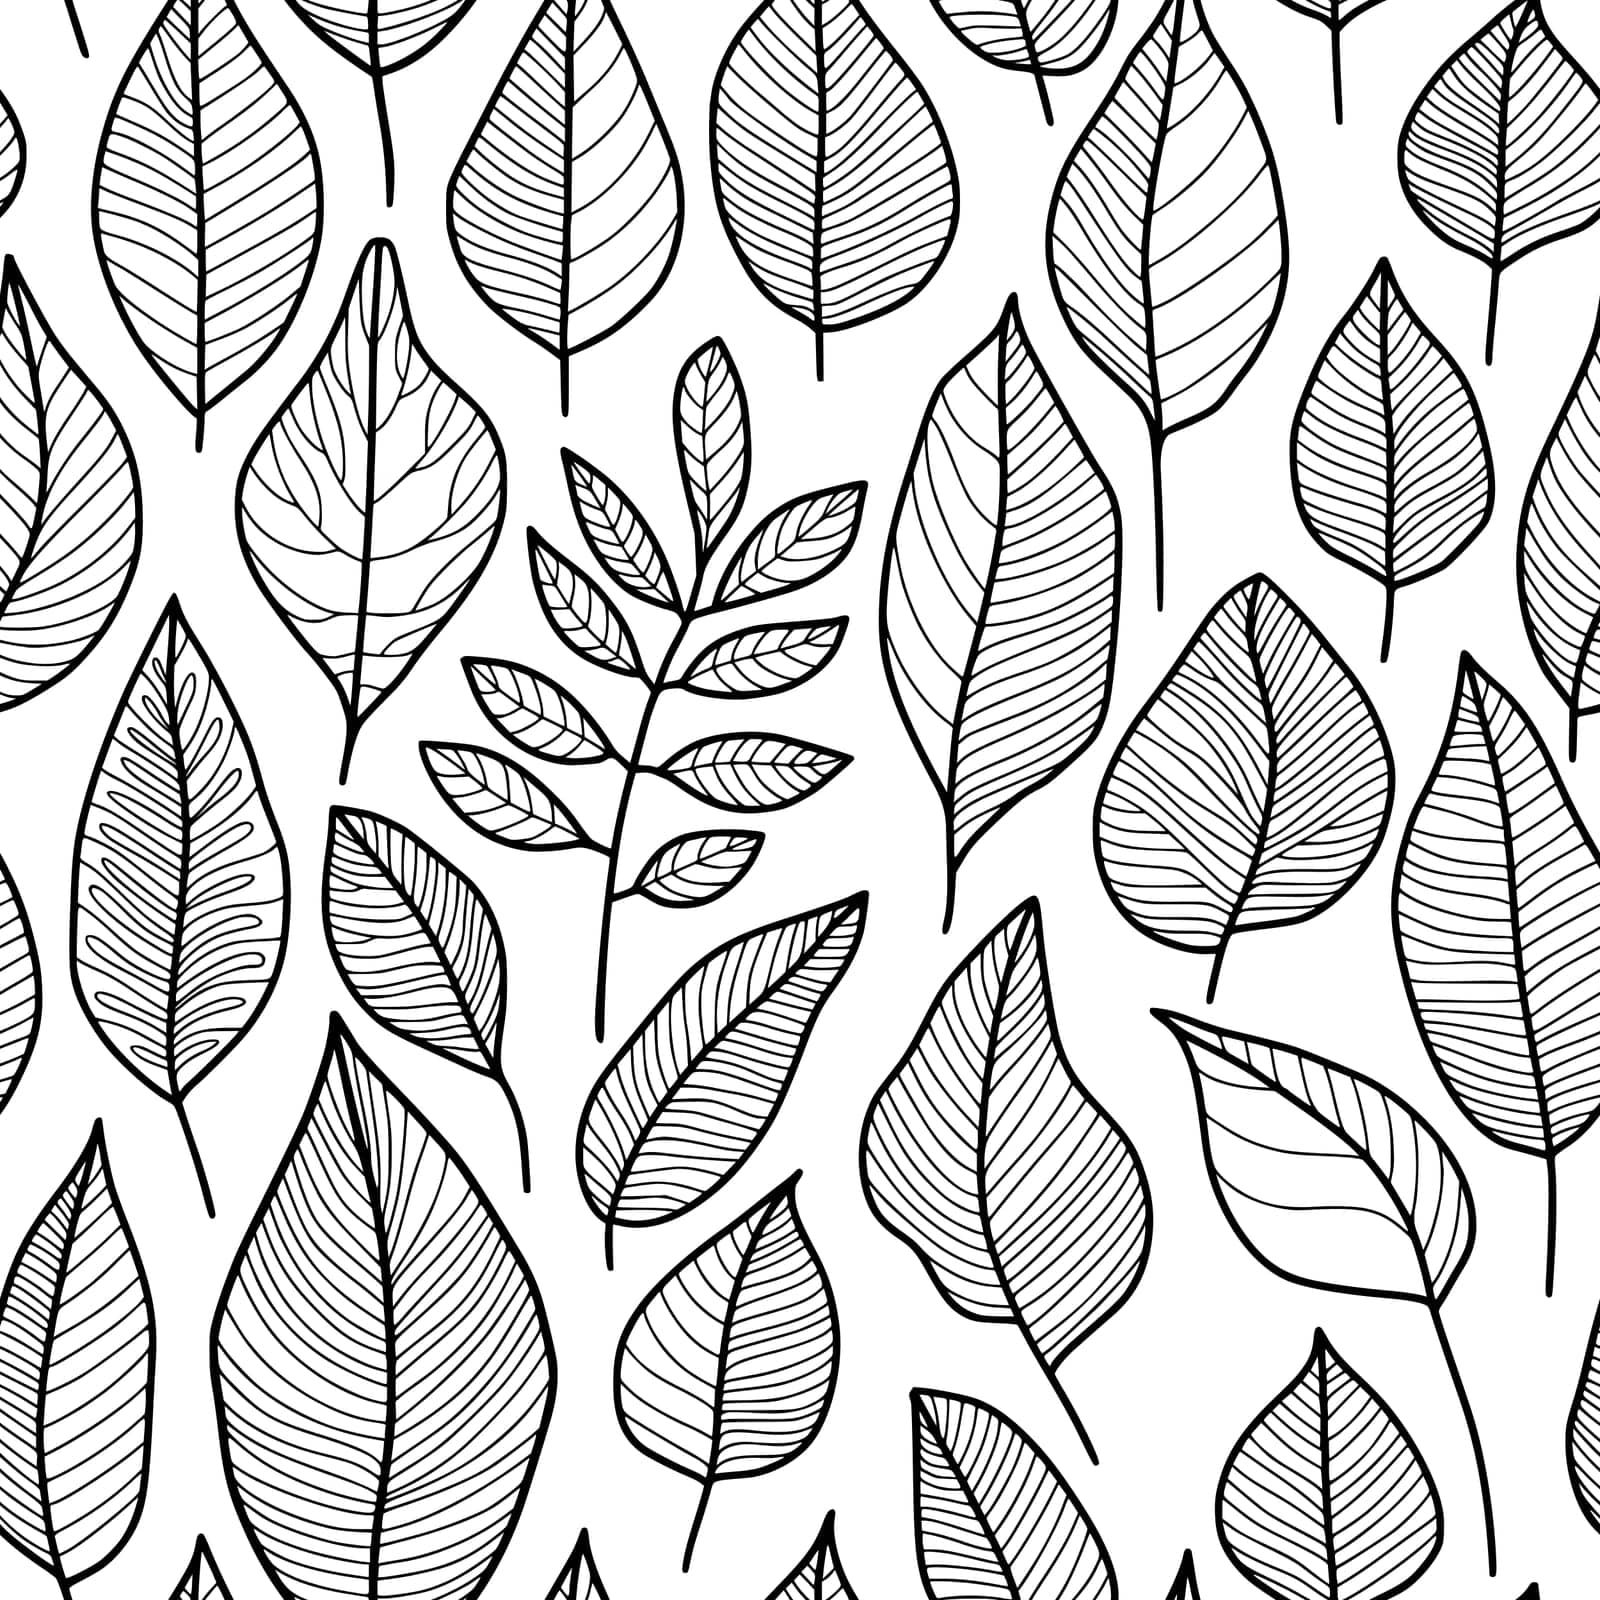 Abstract Leaf Pattern, Black Outline Drawing on a White Background by LanaLeta